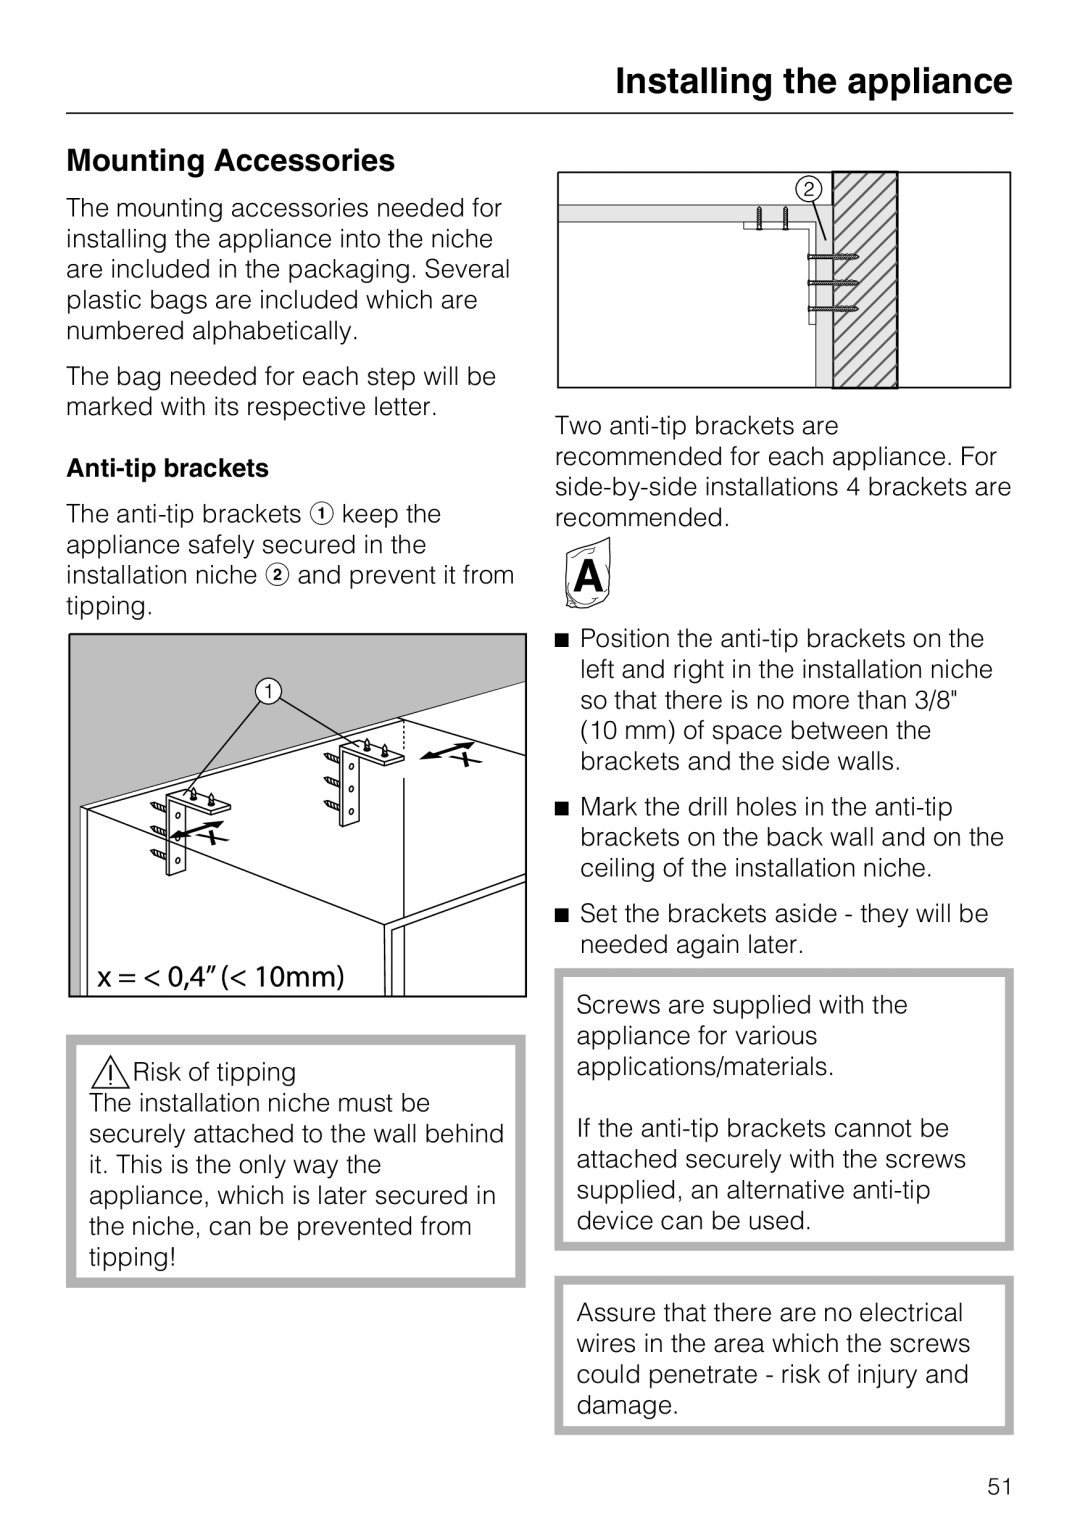 Miele 09 920 570 installation instructions Mounting Accessories, Installing the appliance, Anti-tipbrackets 